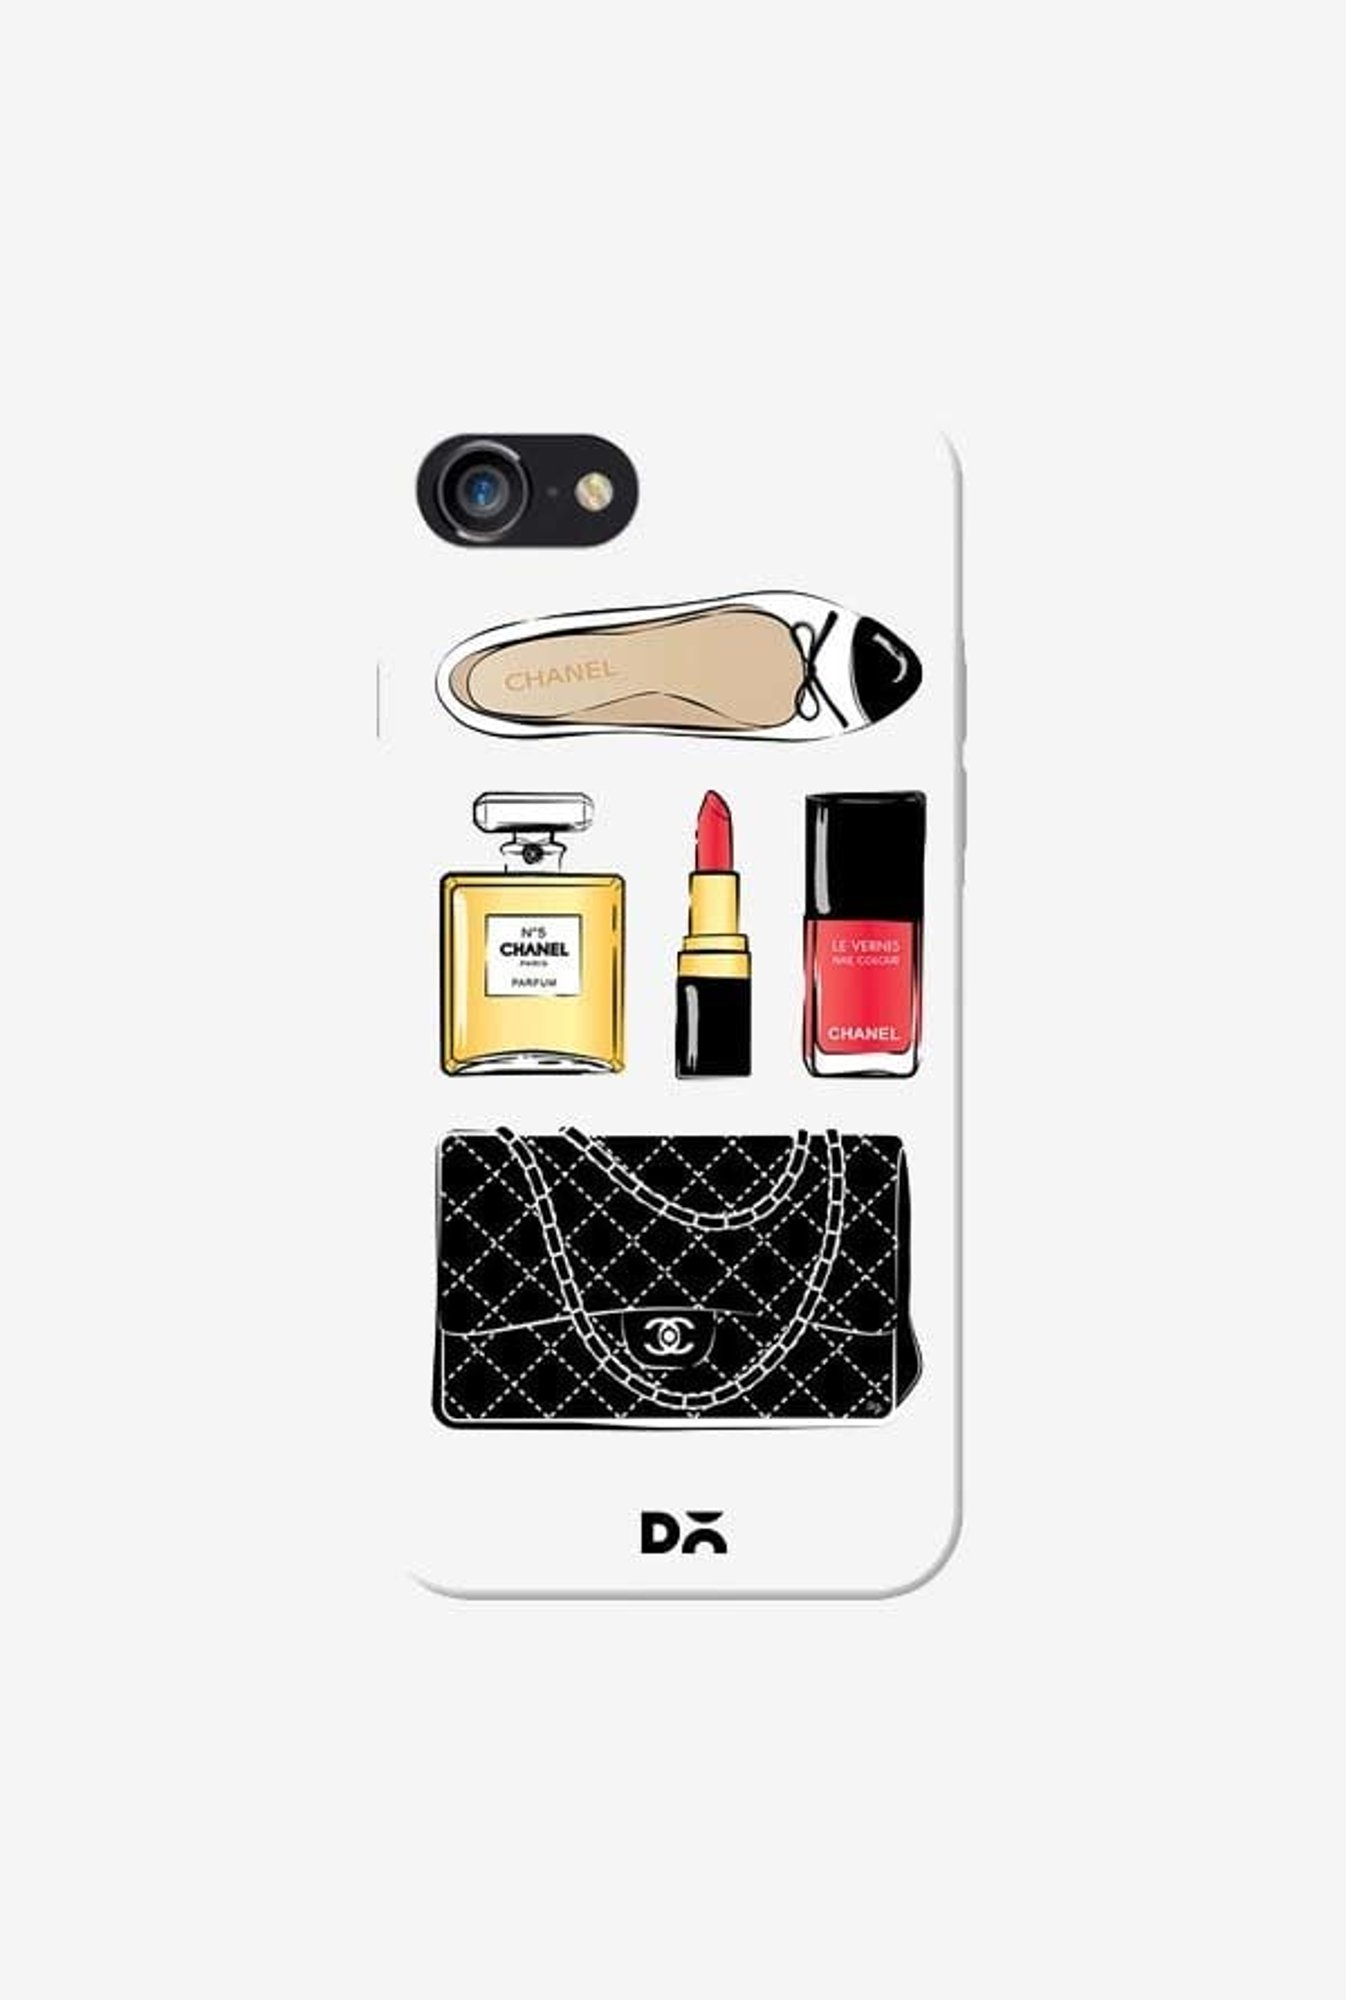 Buy Dailyobjects Chanel Case Cover For Iphone 8 Online At Best Prices Tata Cliq